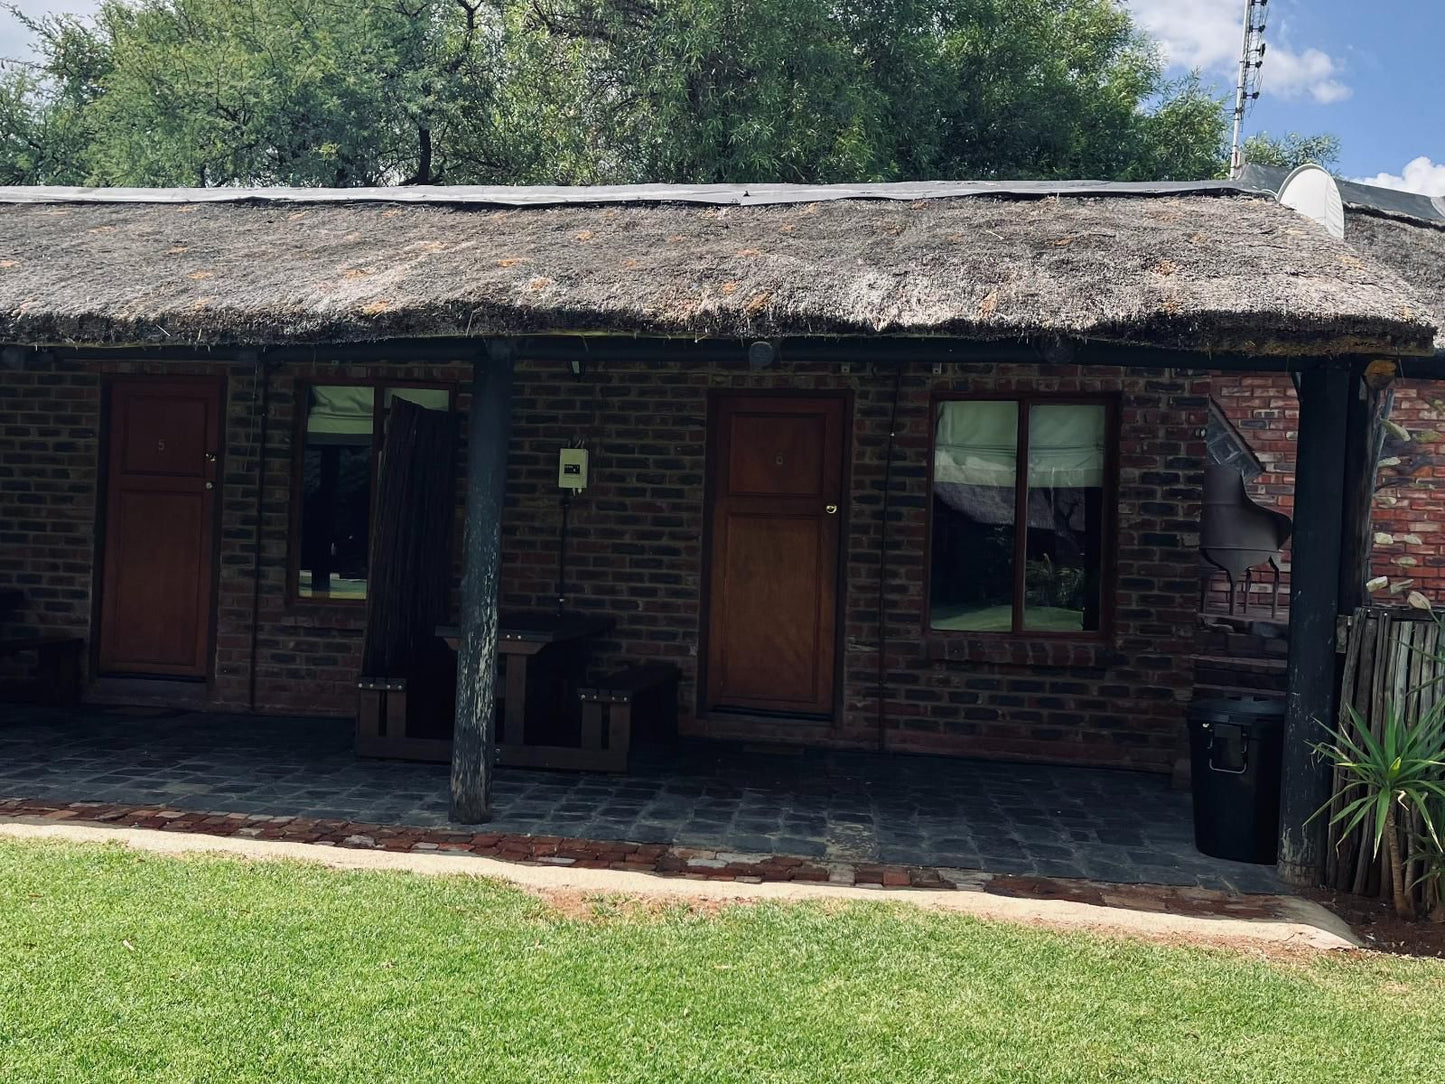 Kameelboom Lodge Vryburg North West Province South Africa Building, Architecture, Cabin